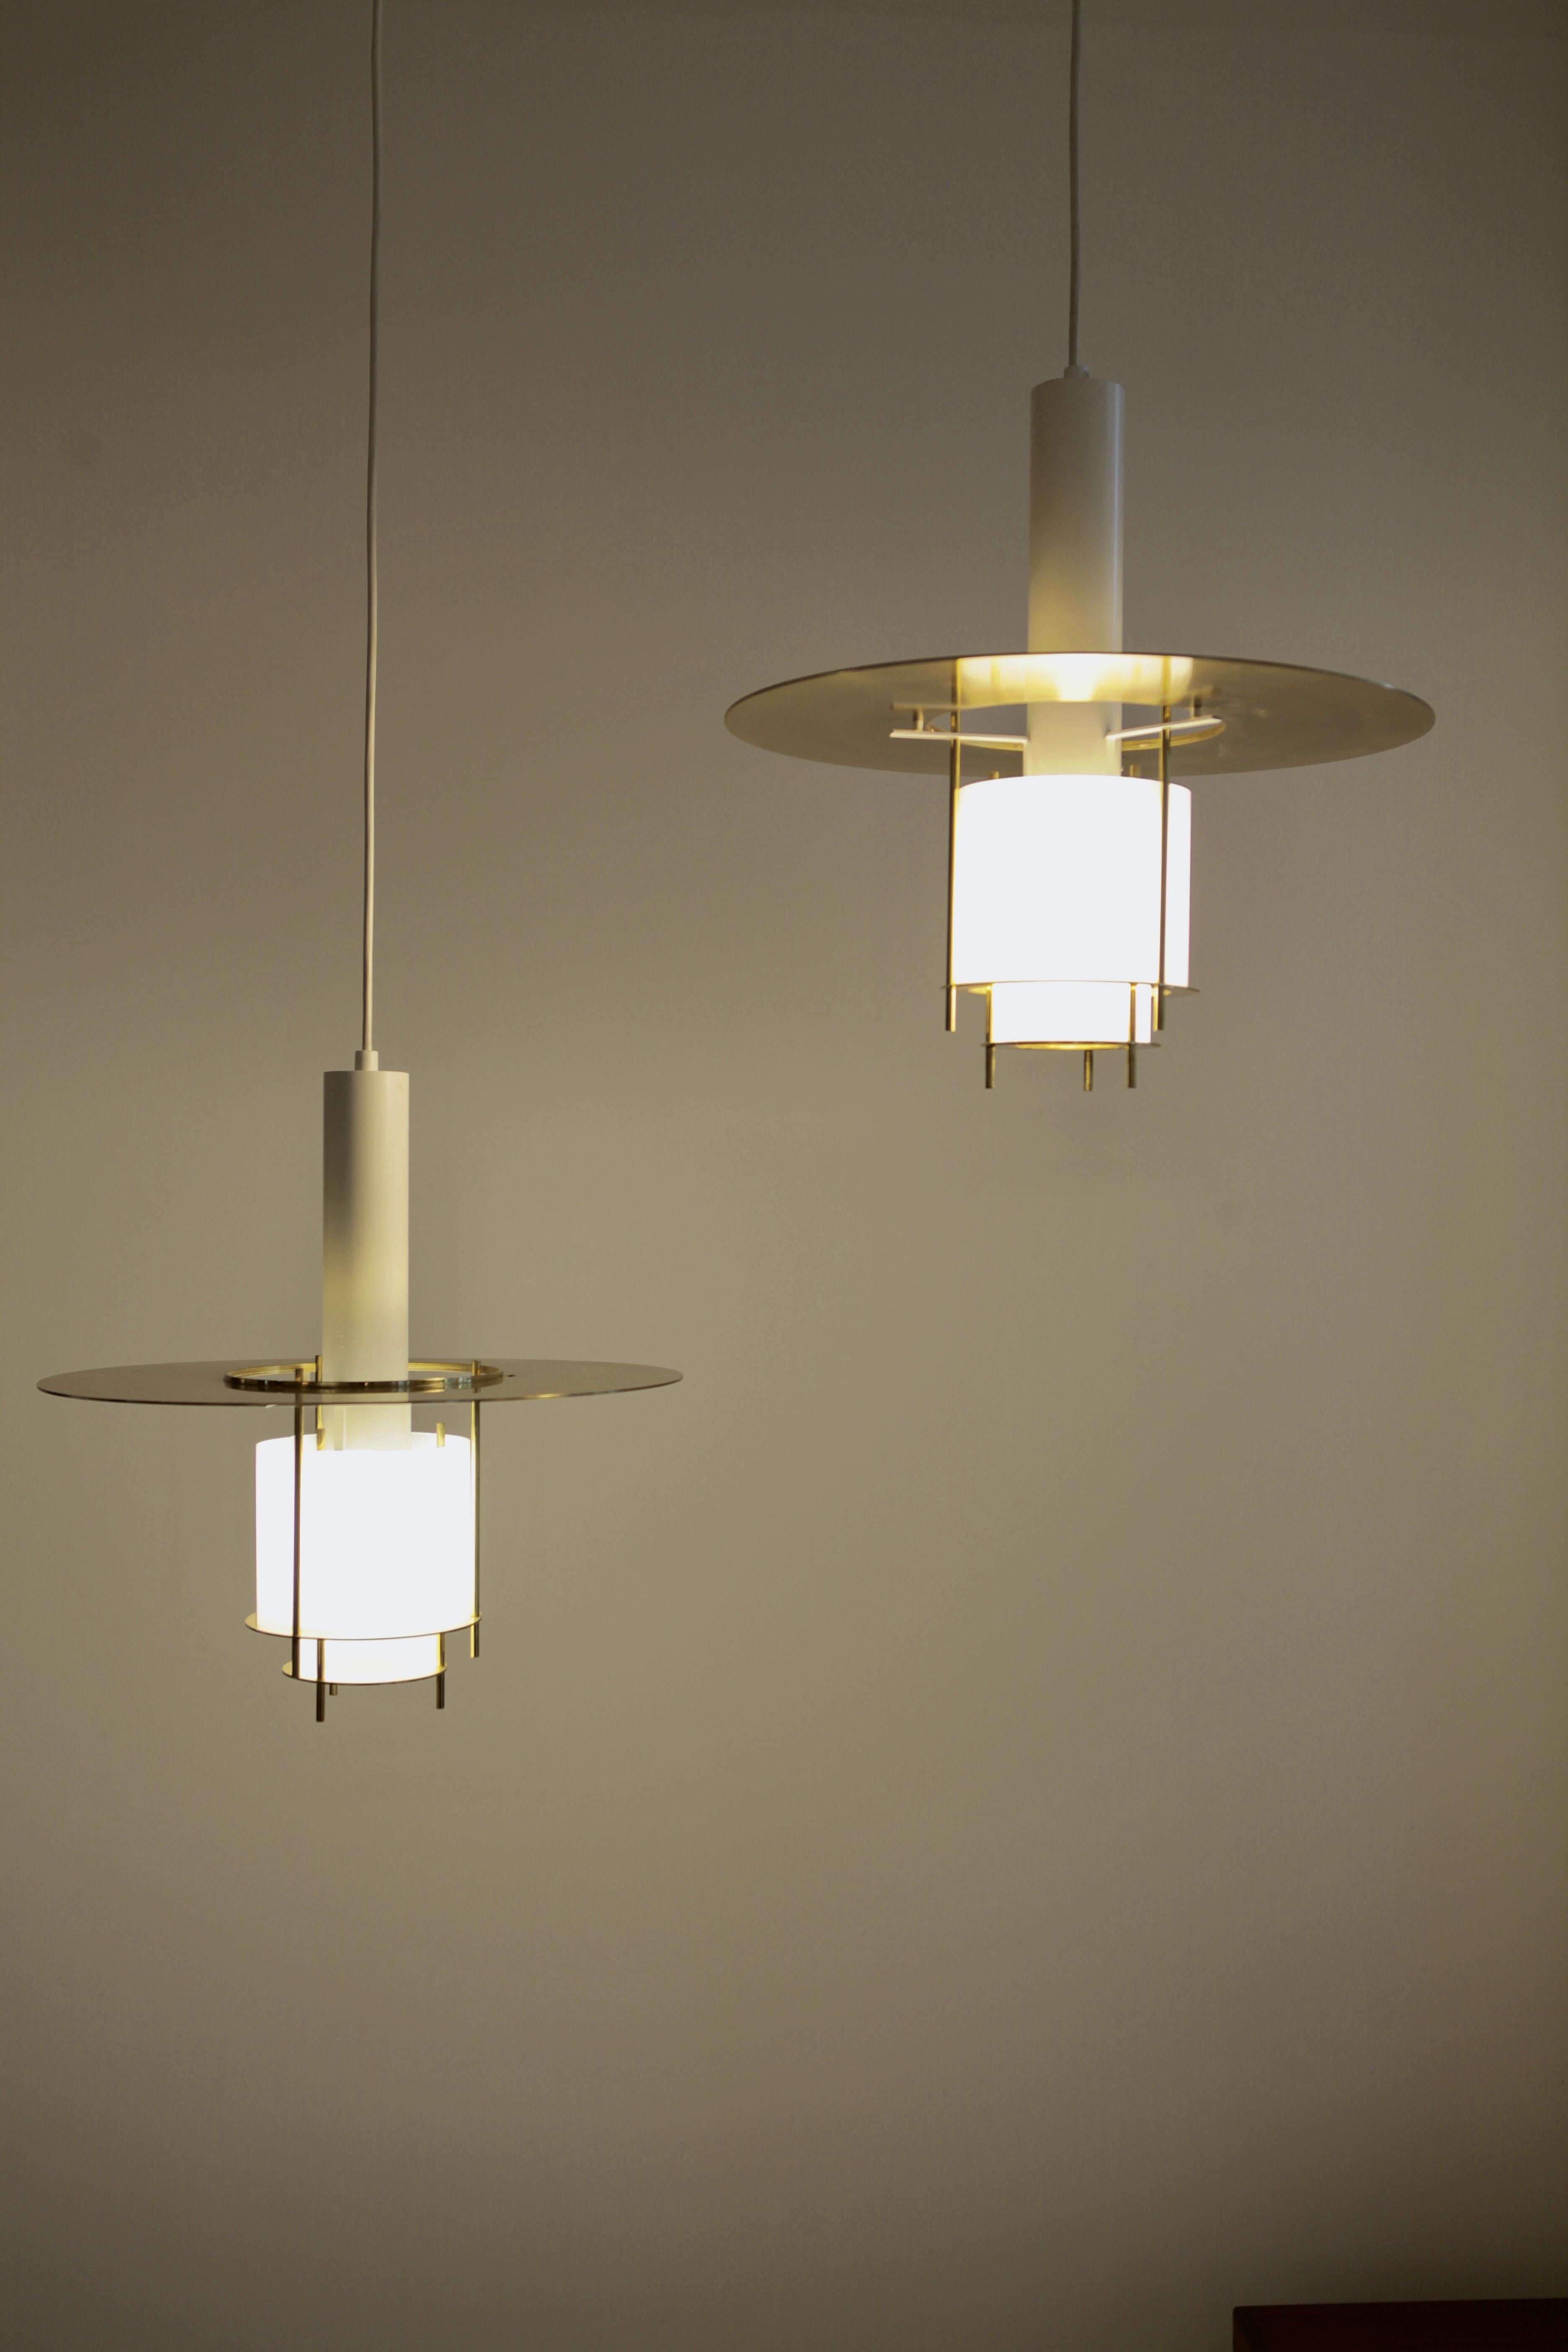 A pair of pendant lamps designed by Juha Leiviskä for Puri town hall in Finland.
Brass and acrylic.
Excellent condition.